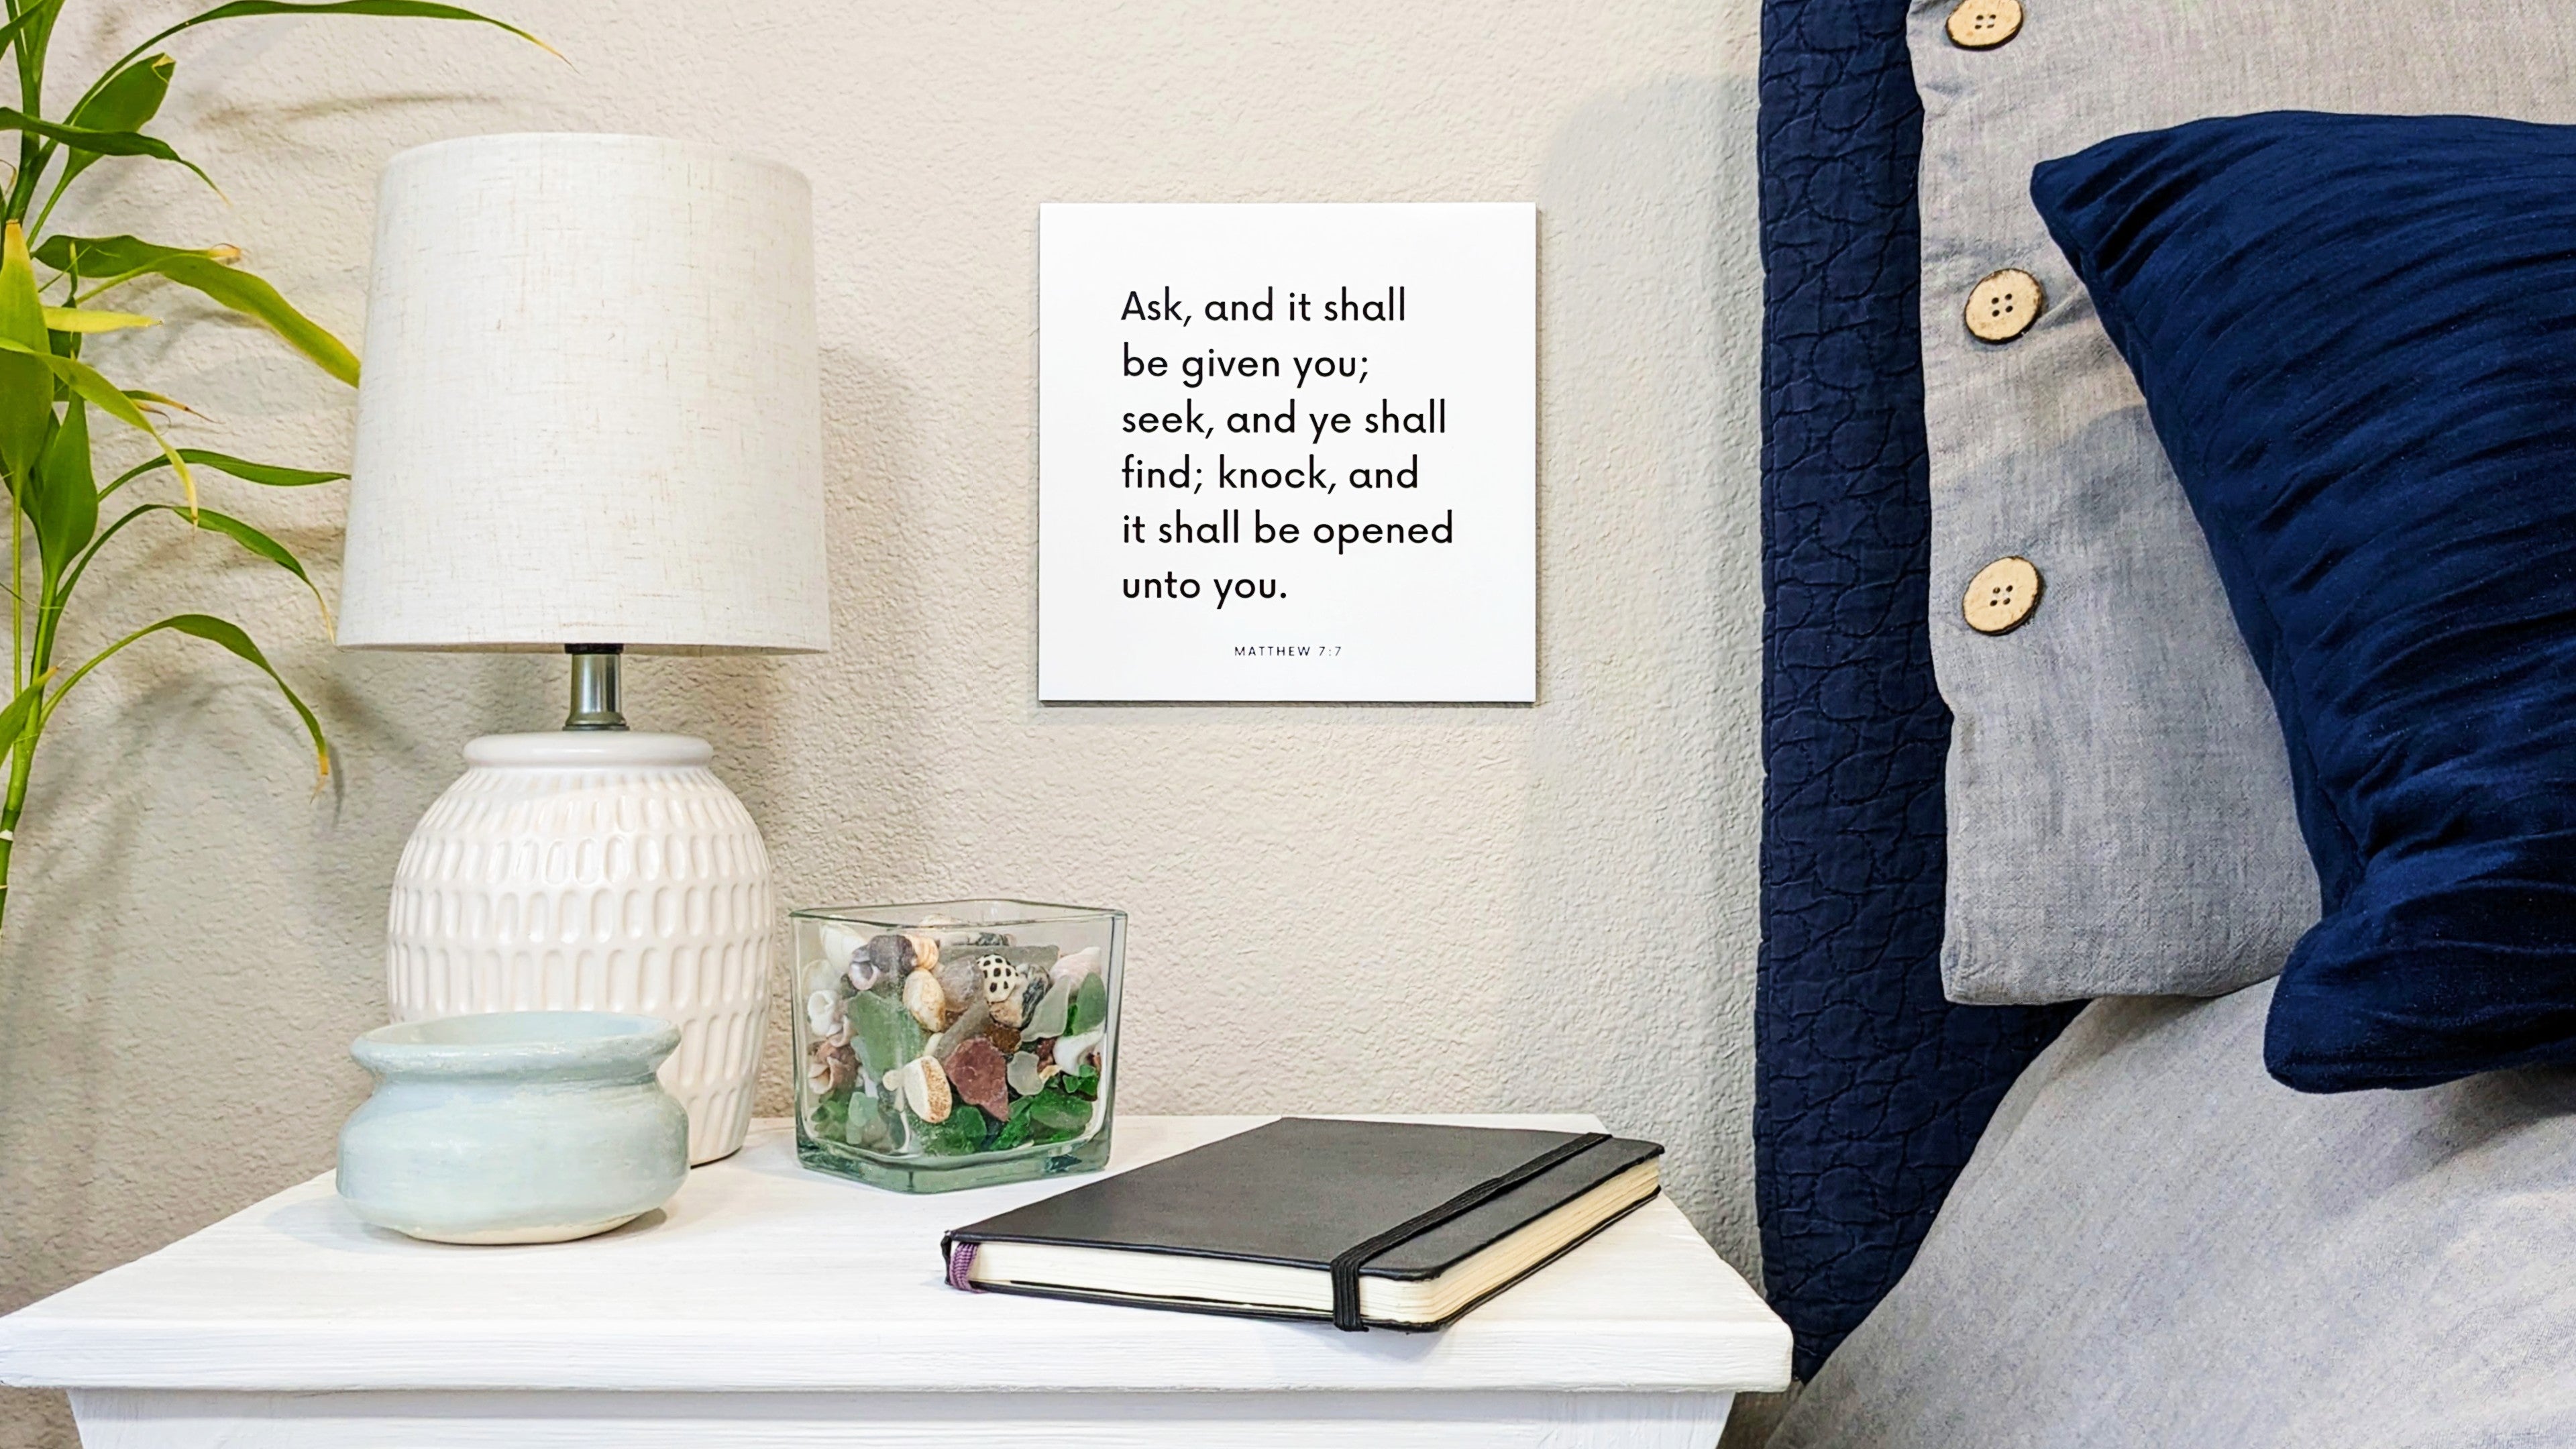 Bedside and nightstand with a scripture tile on the wall